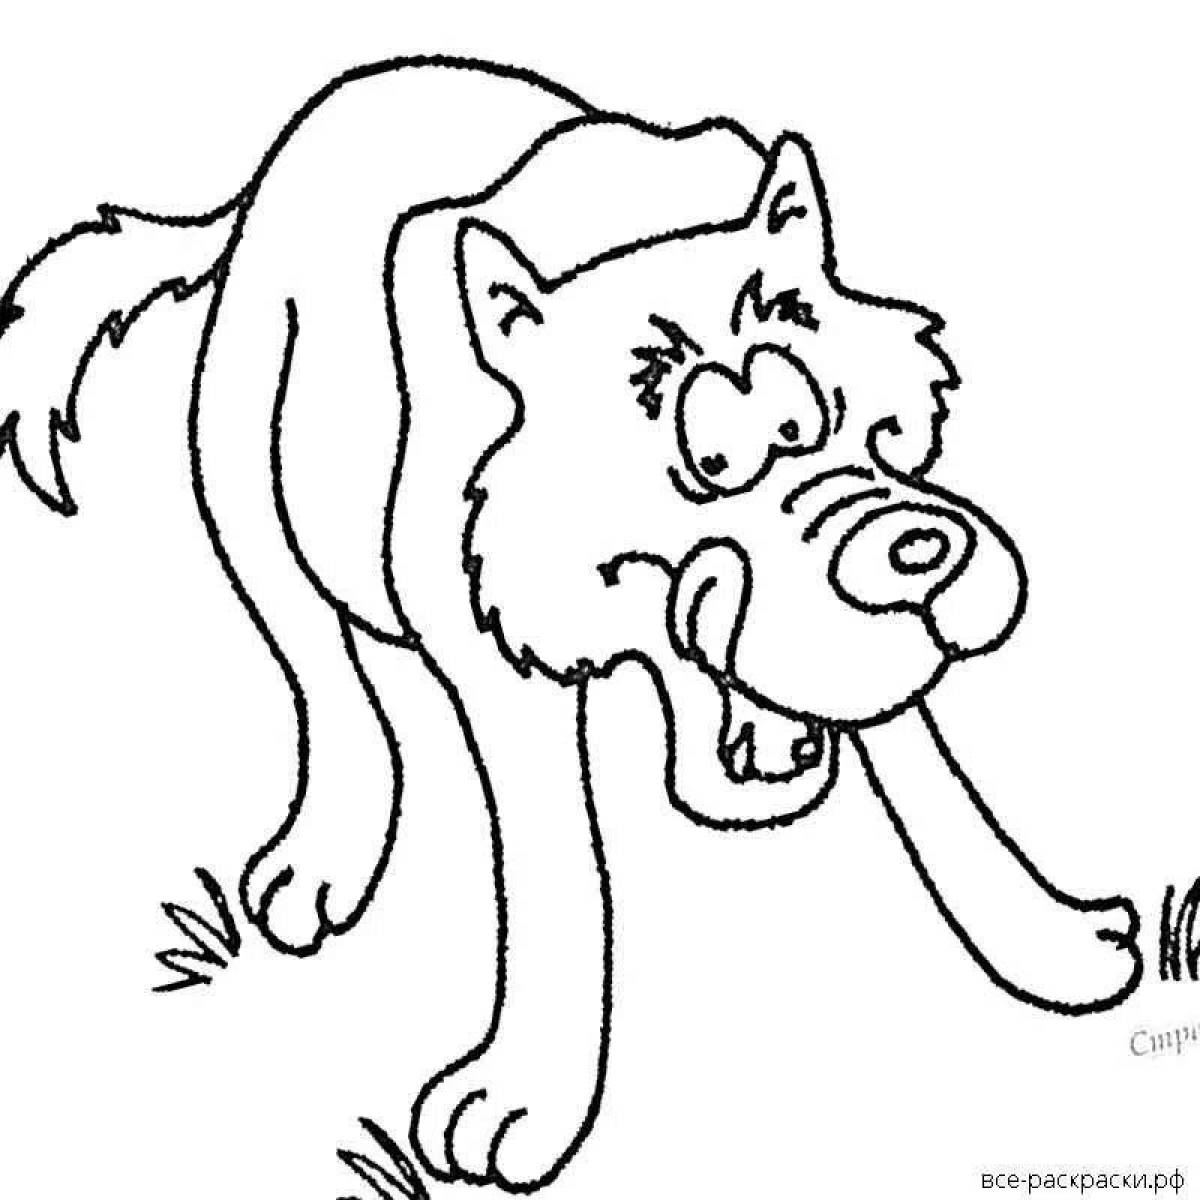 Fairy wolf luminous coloring page